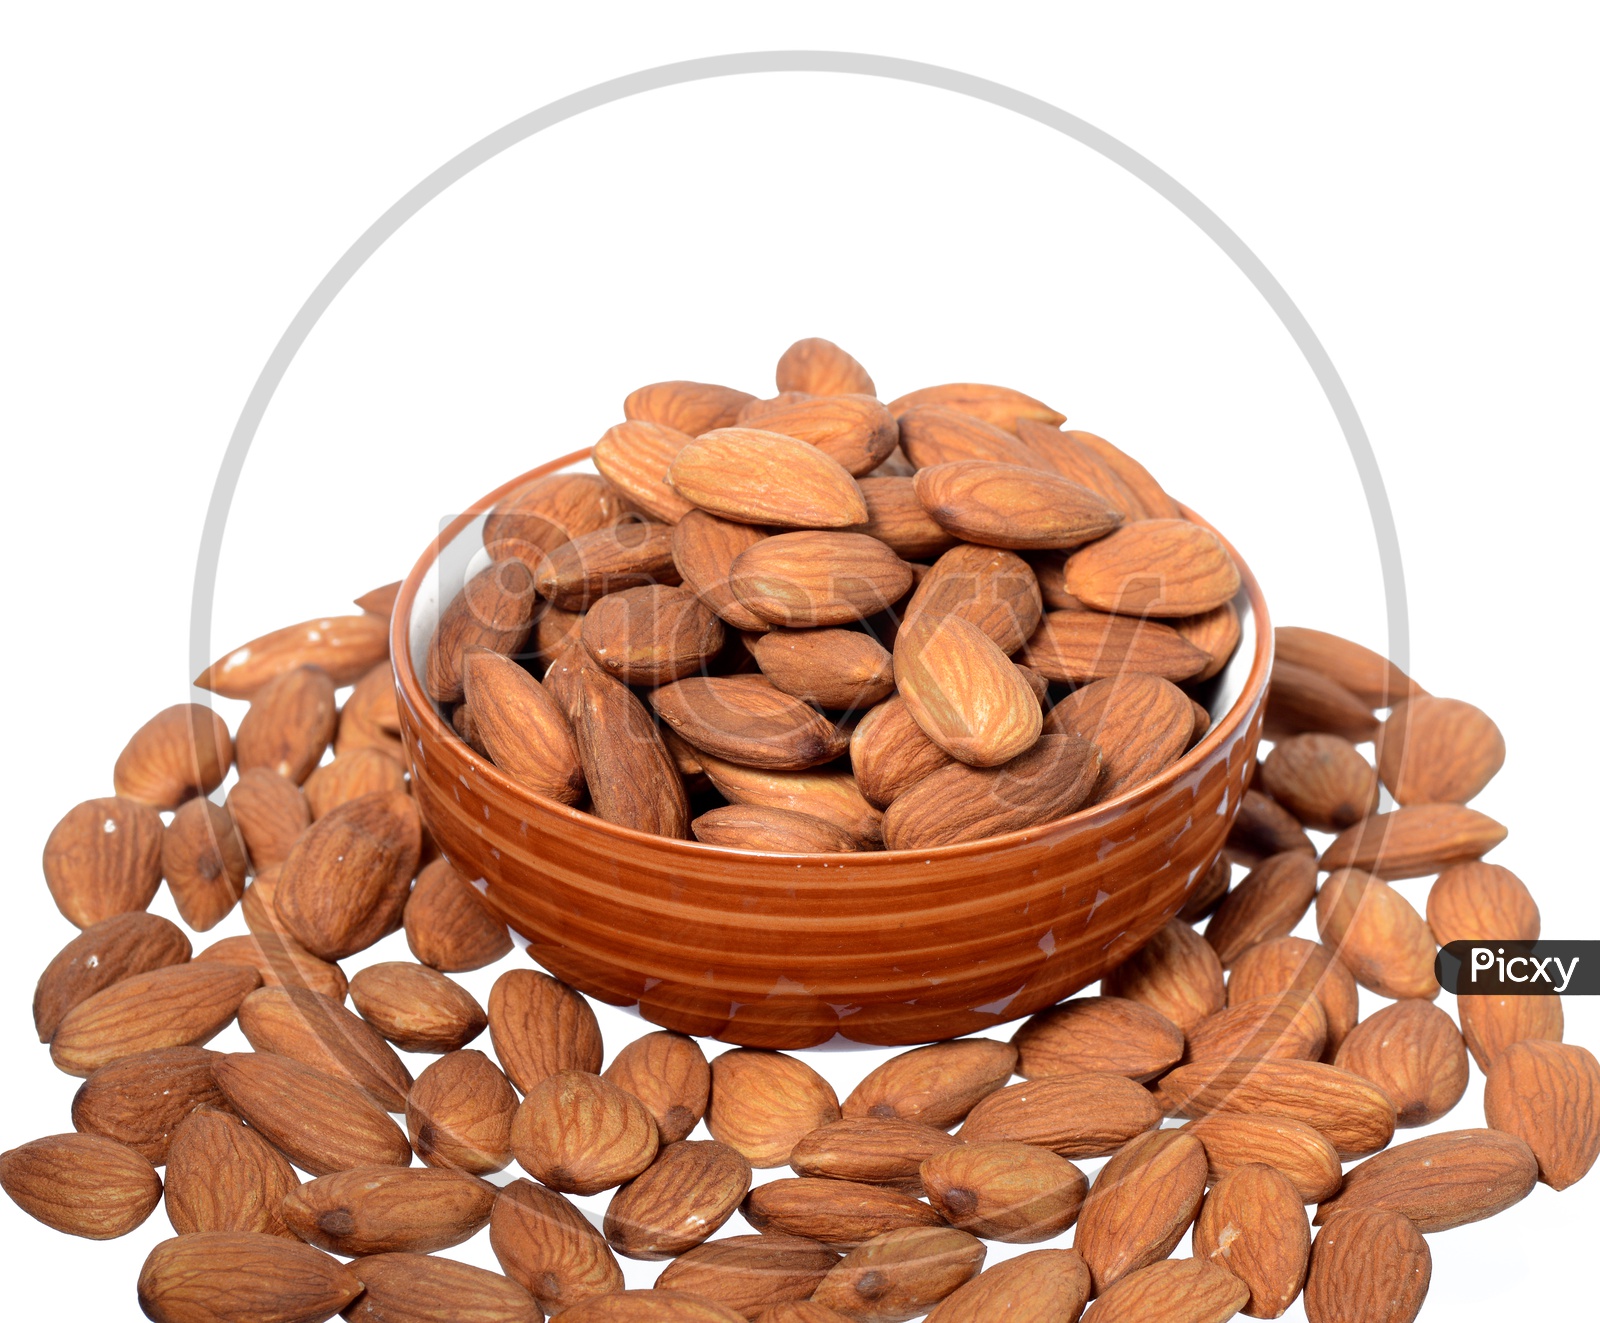 Almonds Or Badam Nuts Heap In a Bowl On an Isolated White Background